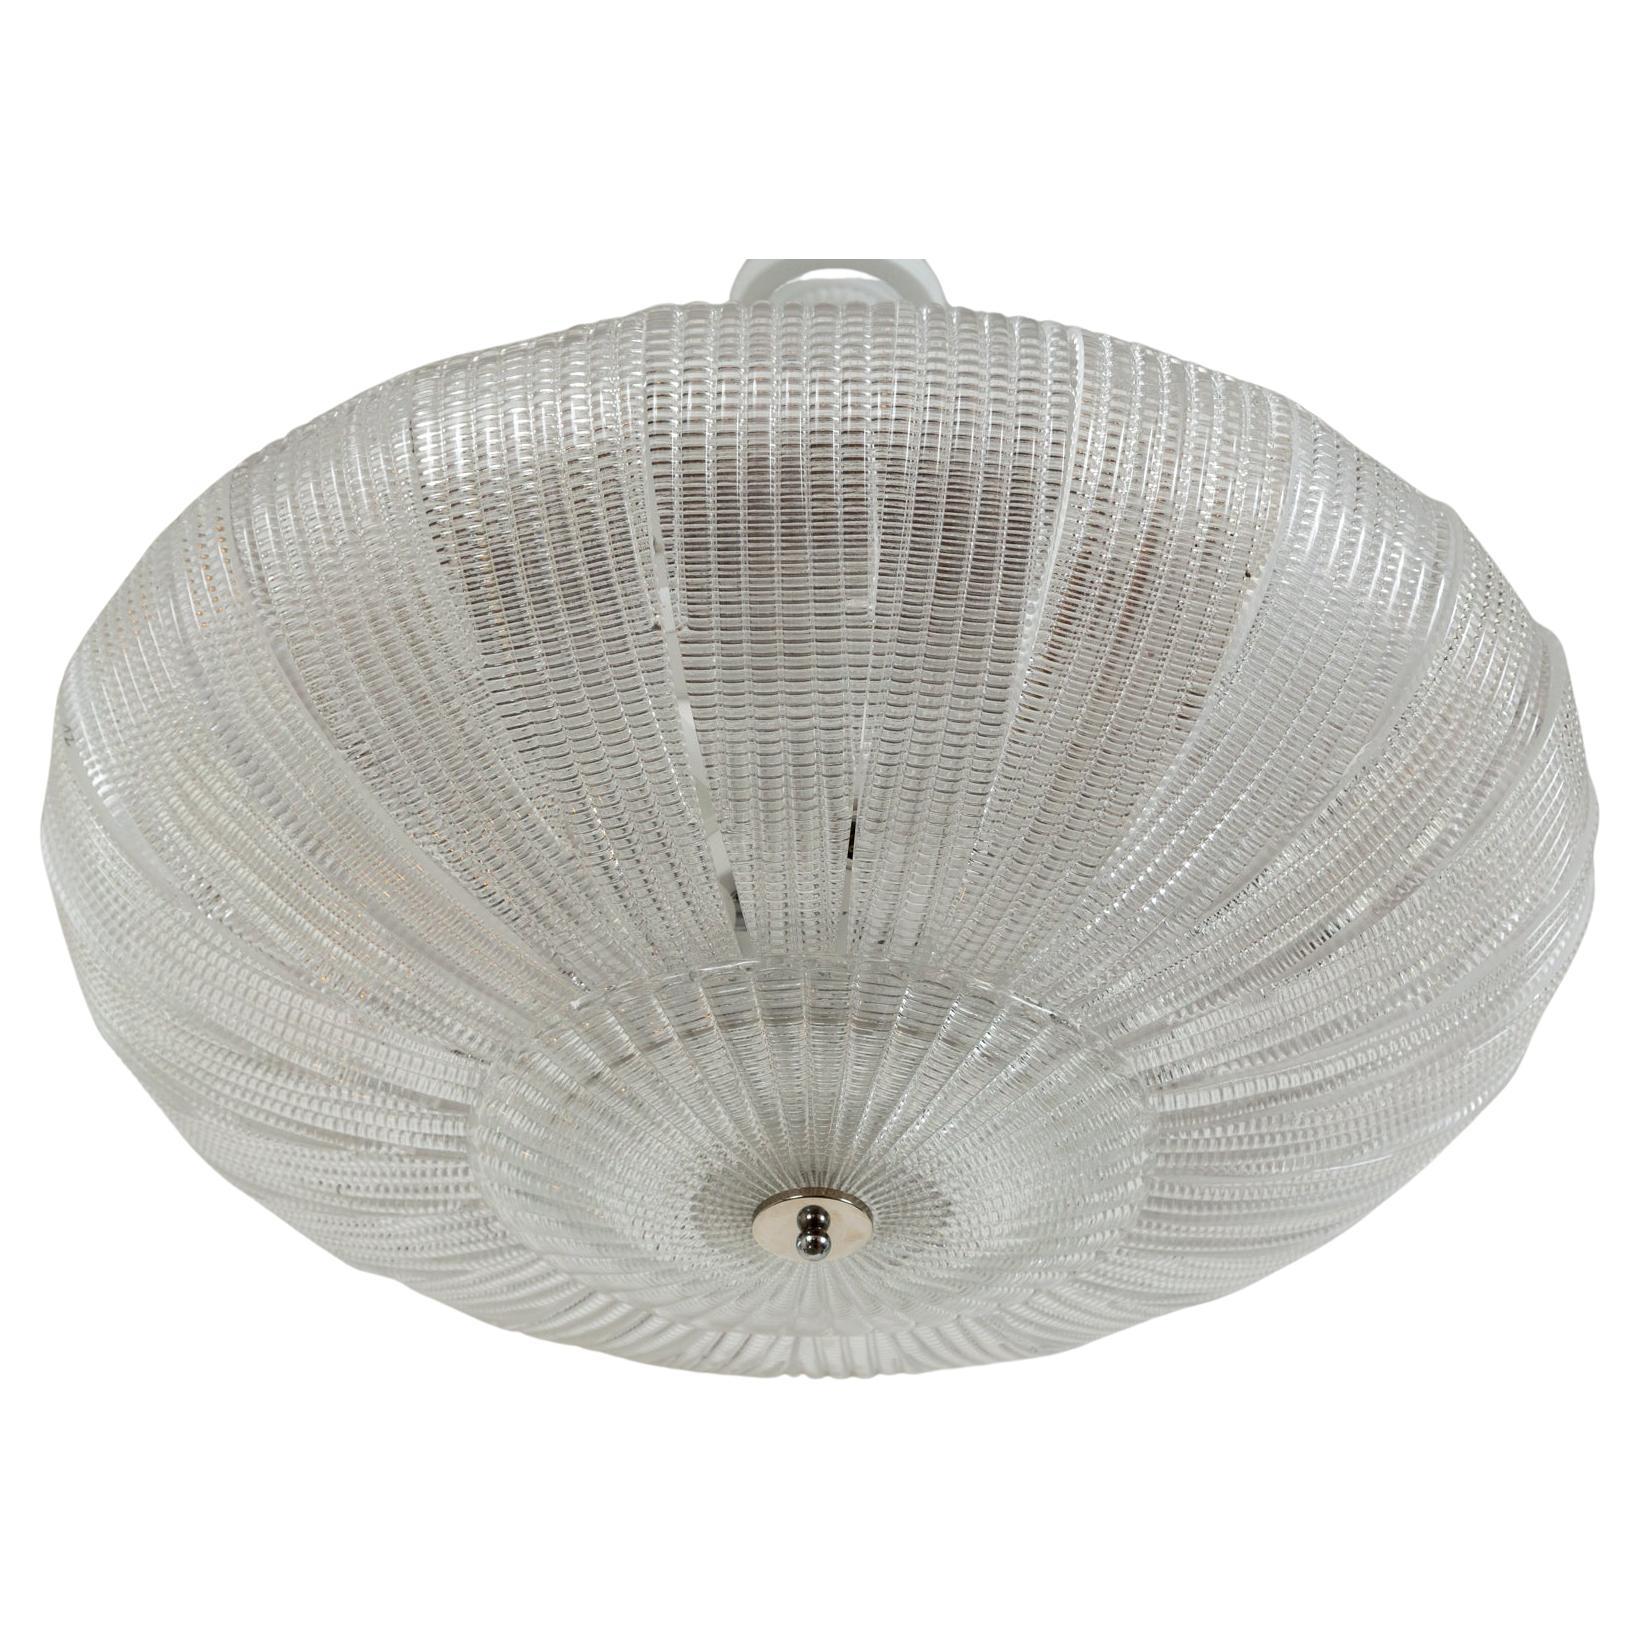 Modern Dome-Shaped Glass Ceiling Fixture, Contemporary For Sale